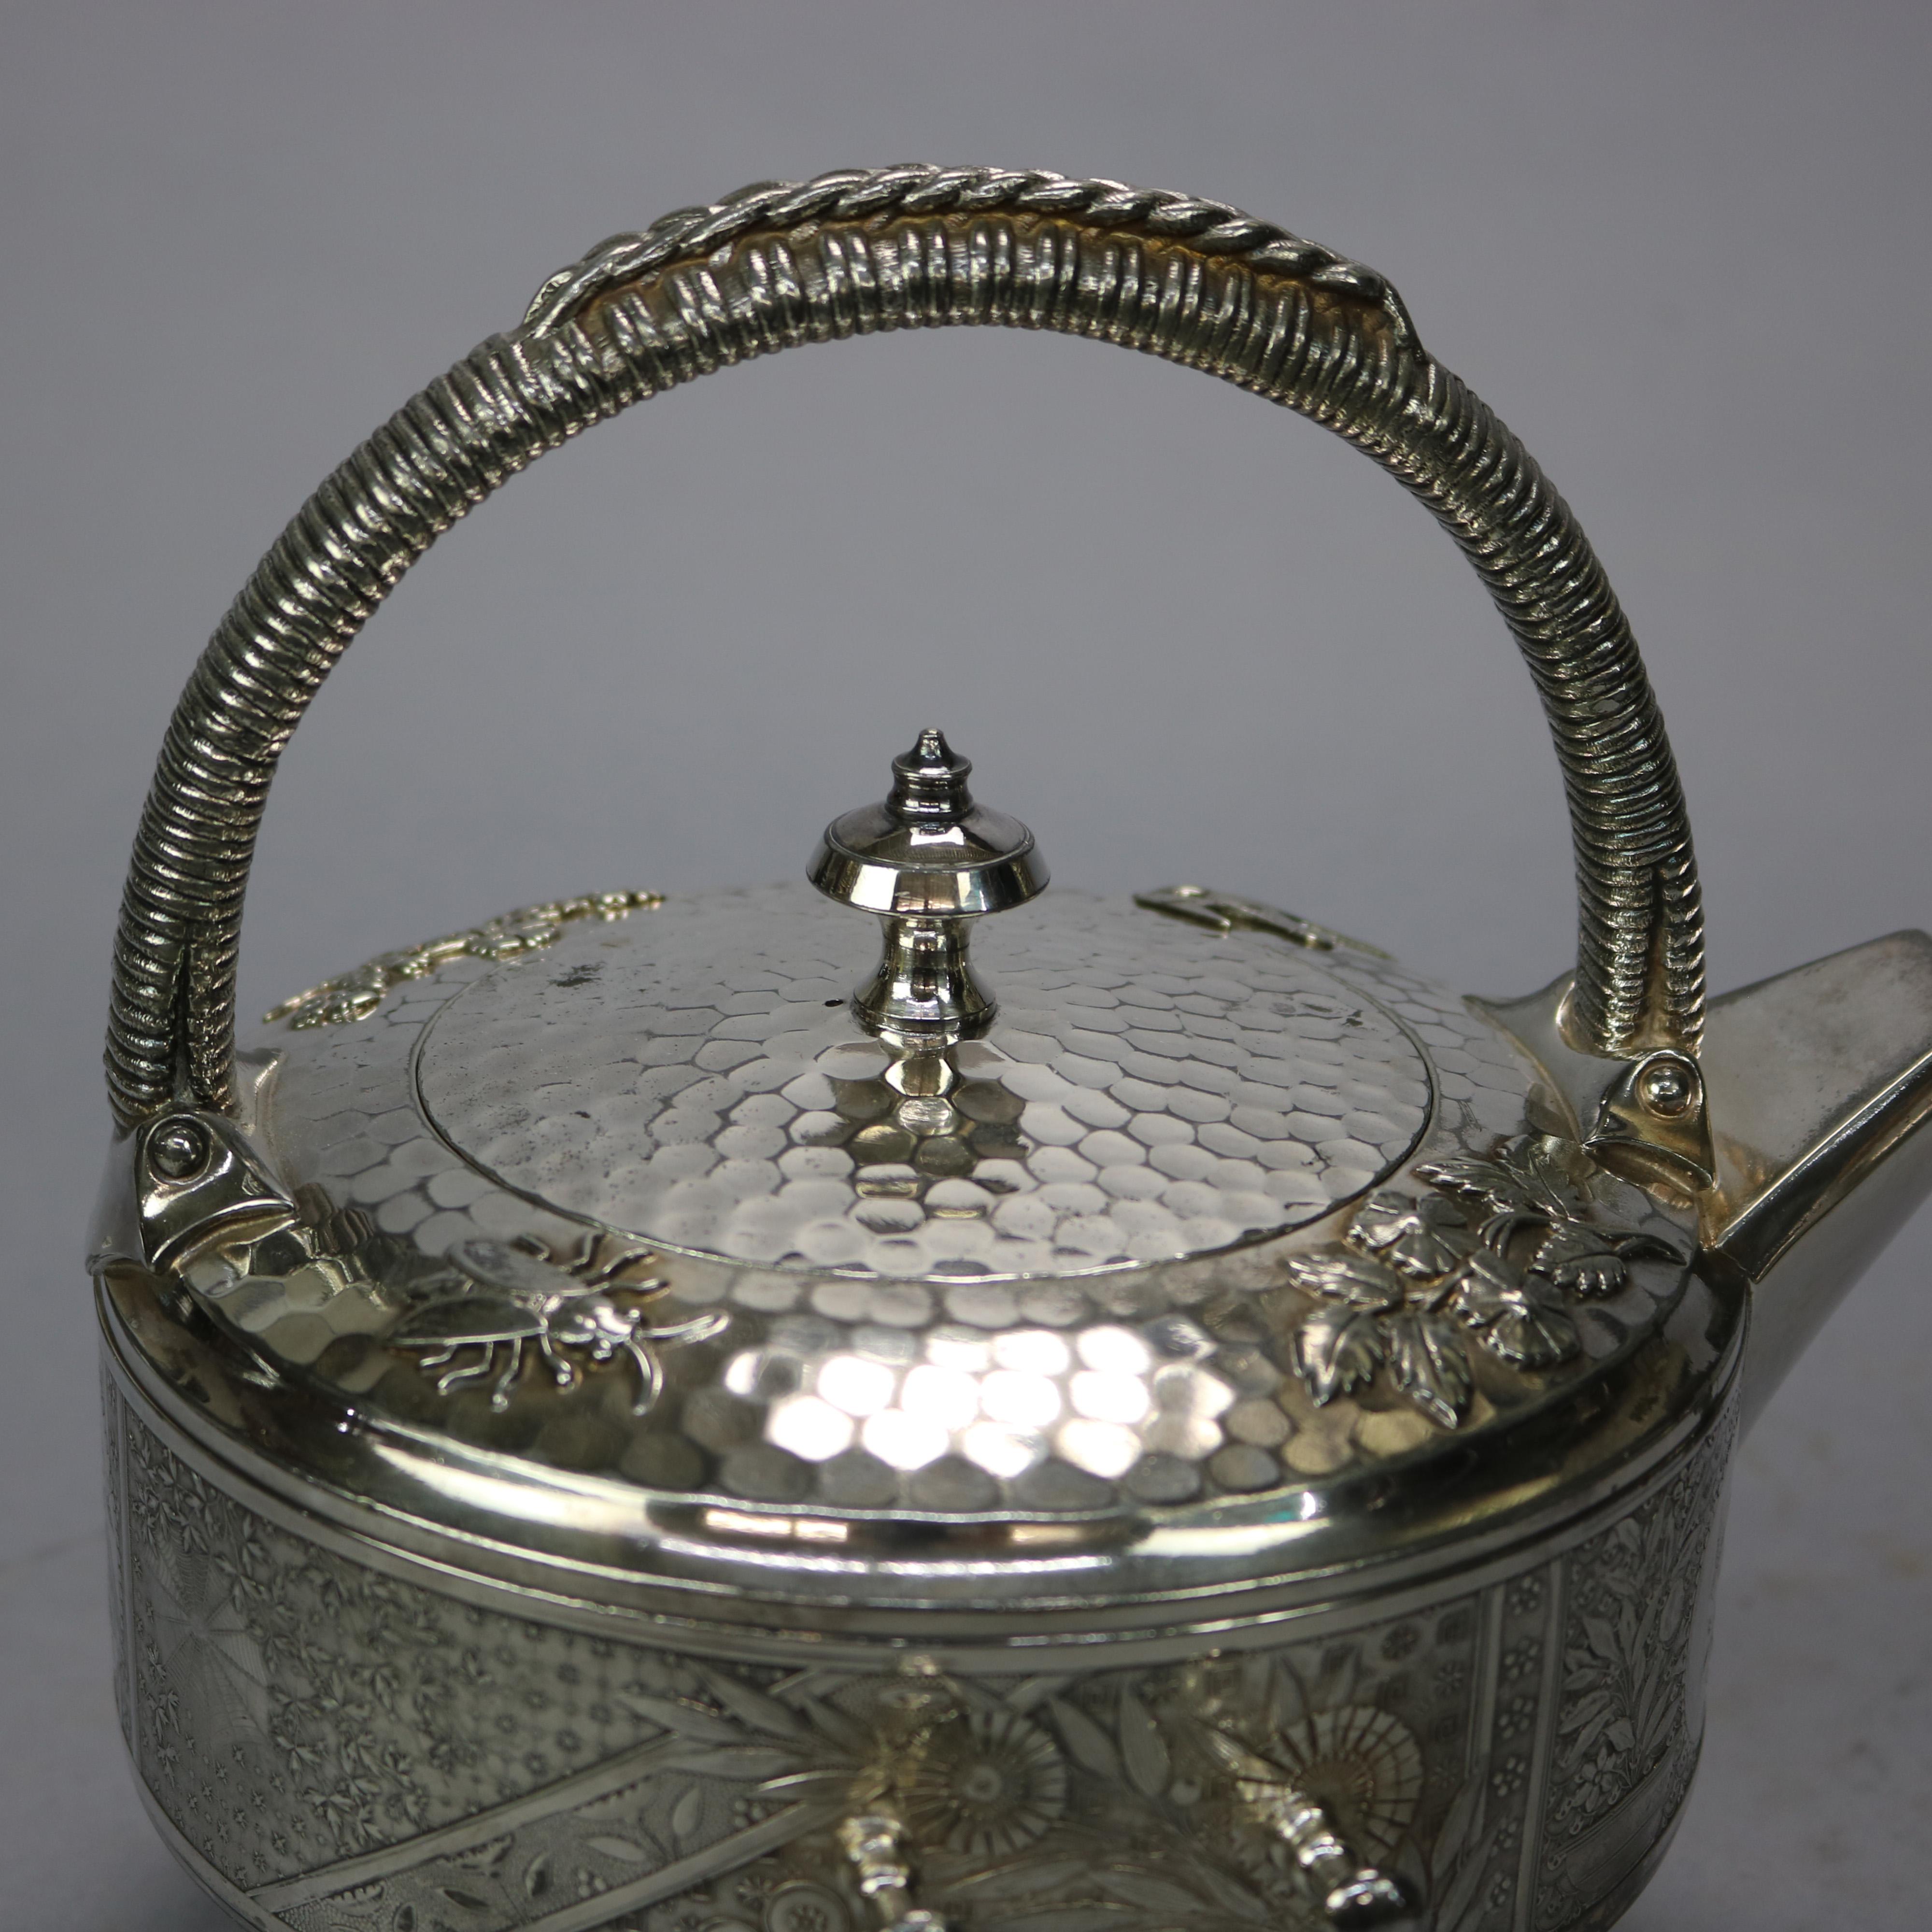 Antique Aesthetic Movement Hammered Silver Plate Tea Set by Rogers, 1870 5